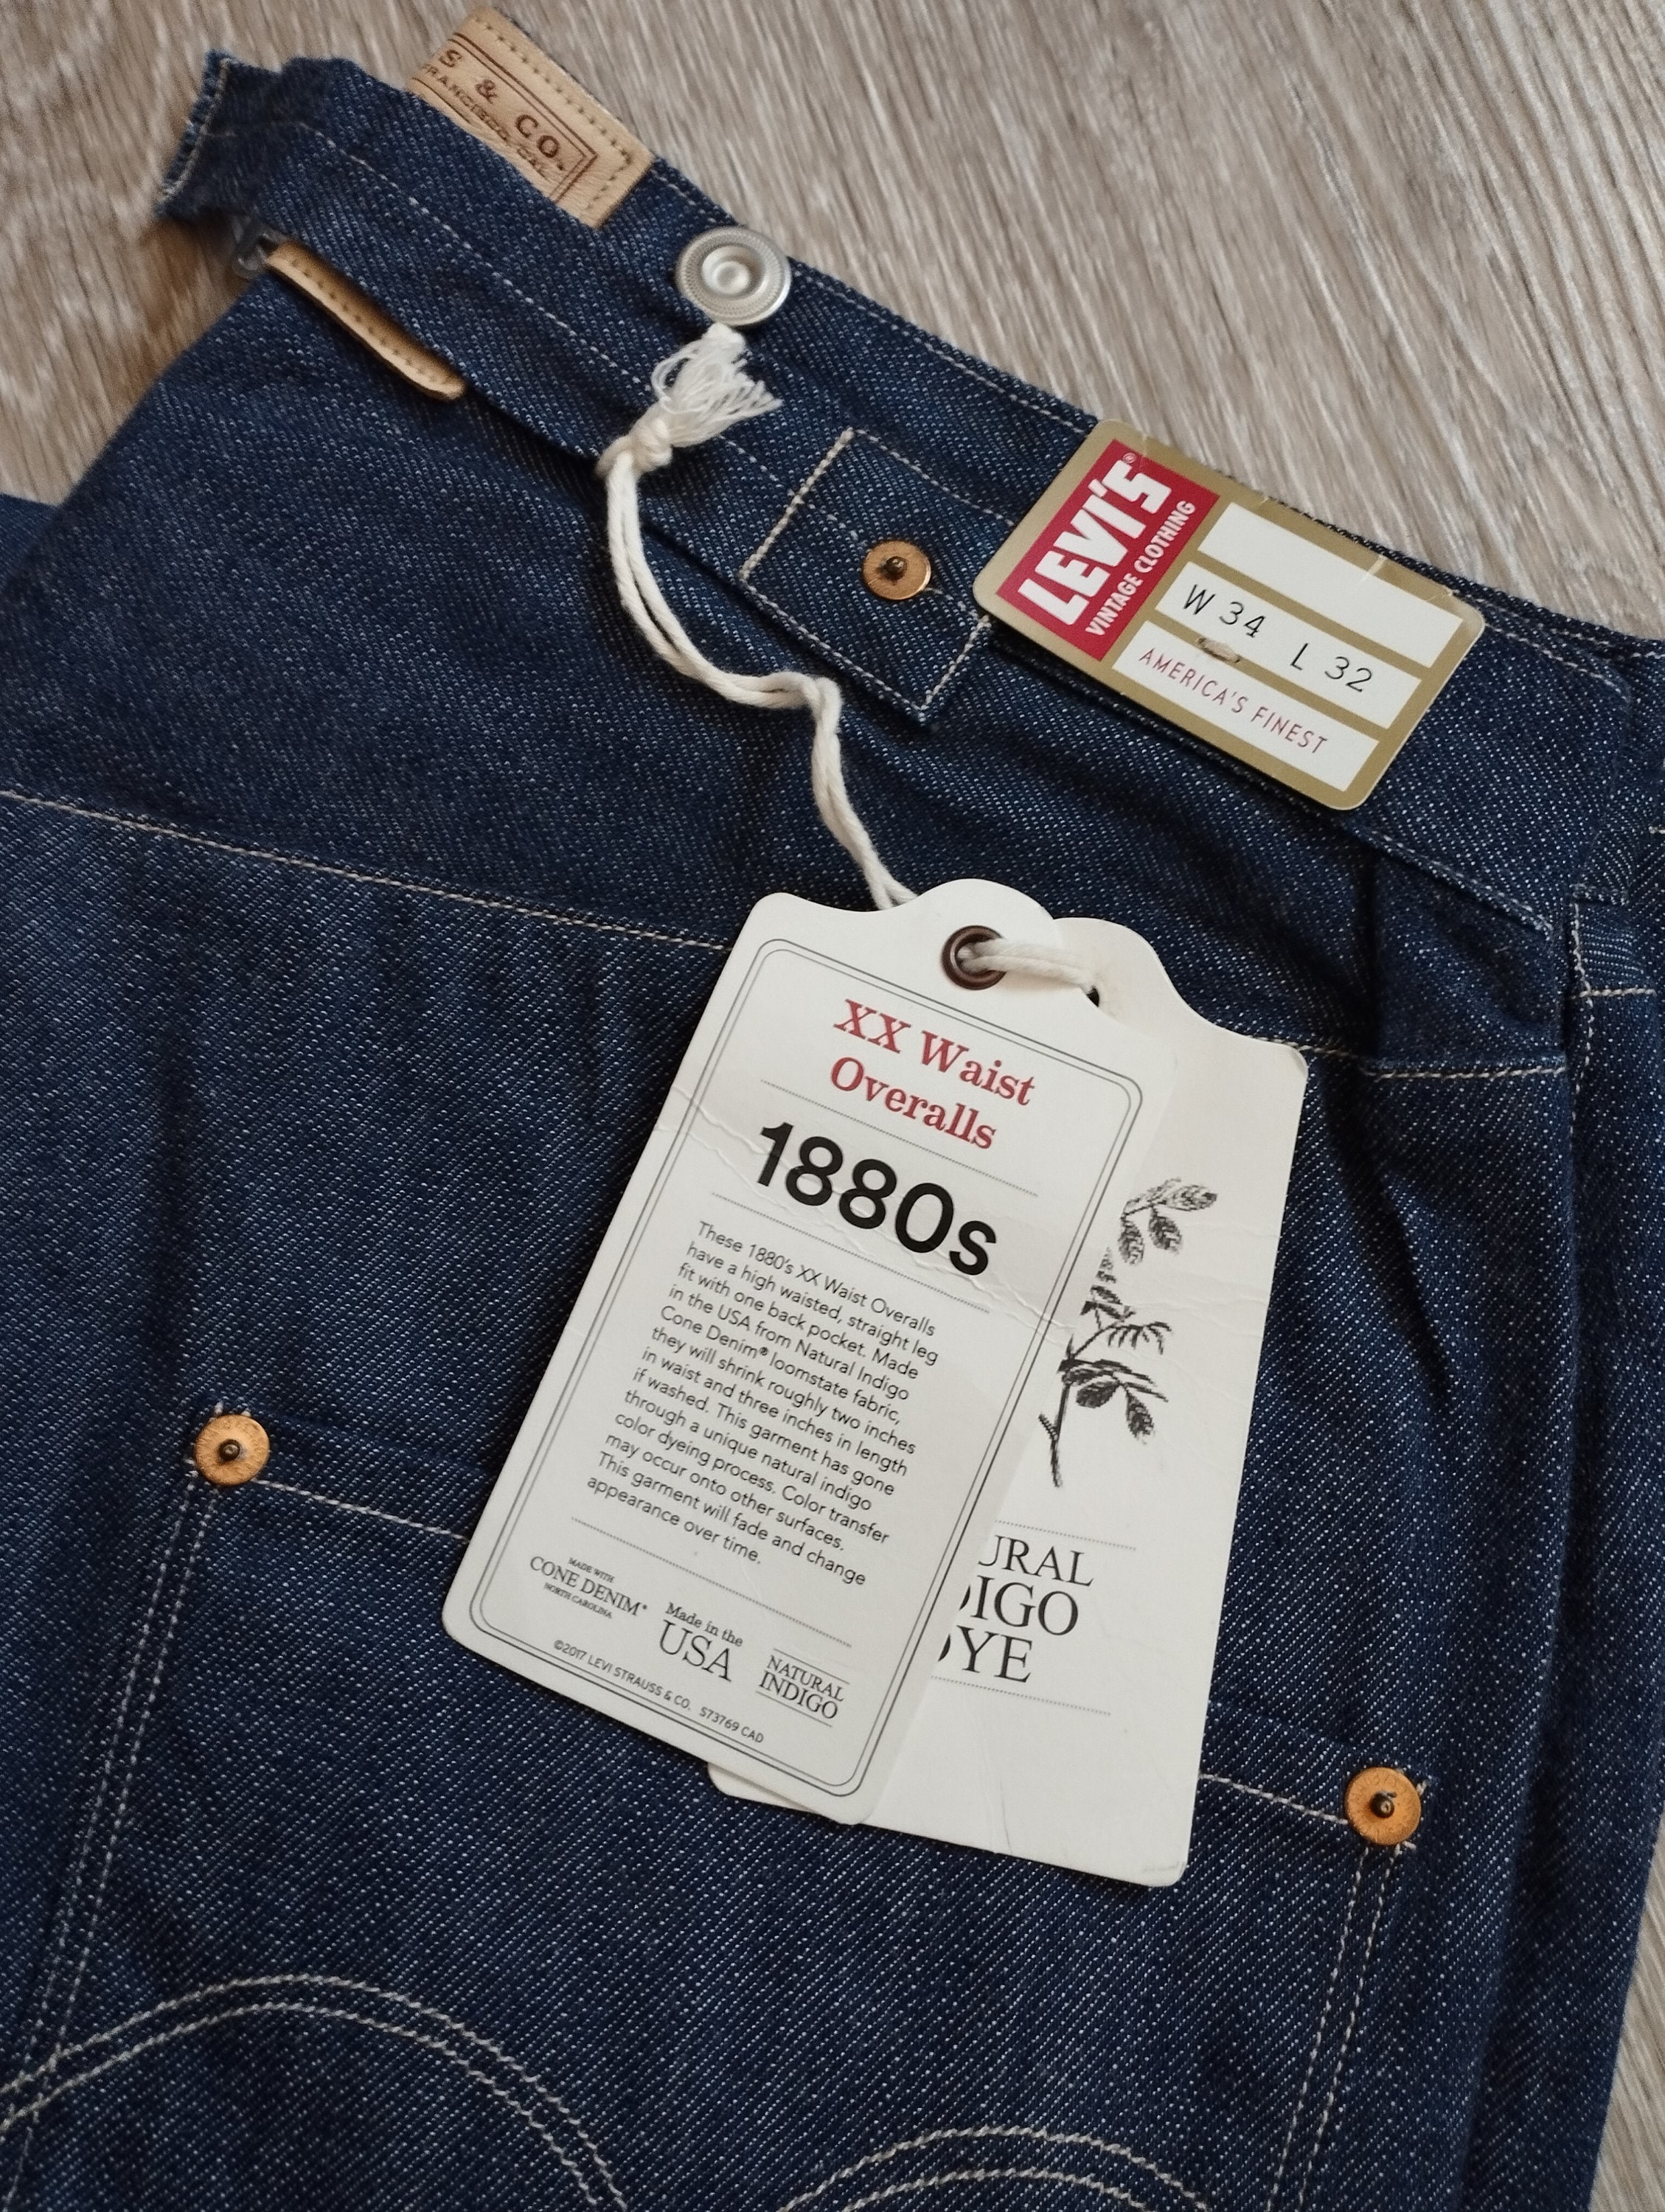 denimmofos Levi's Vintage Clothing 1880s Waist Overalls W34 L32 - Lvc Made in USA Big E Deadstock - Like 1873